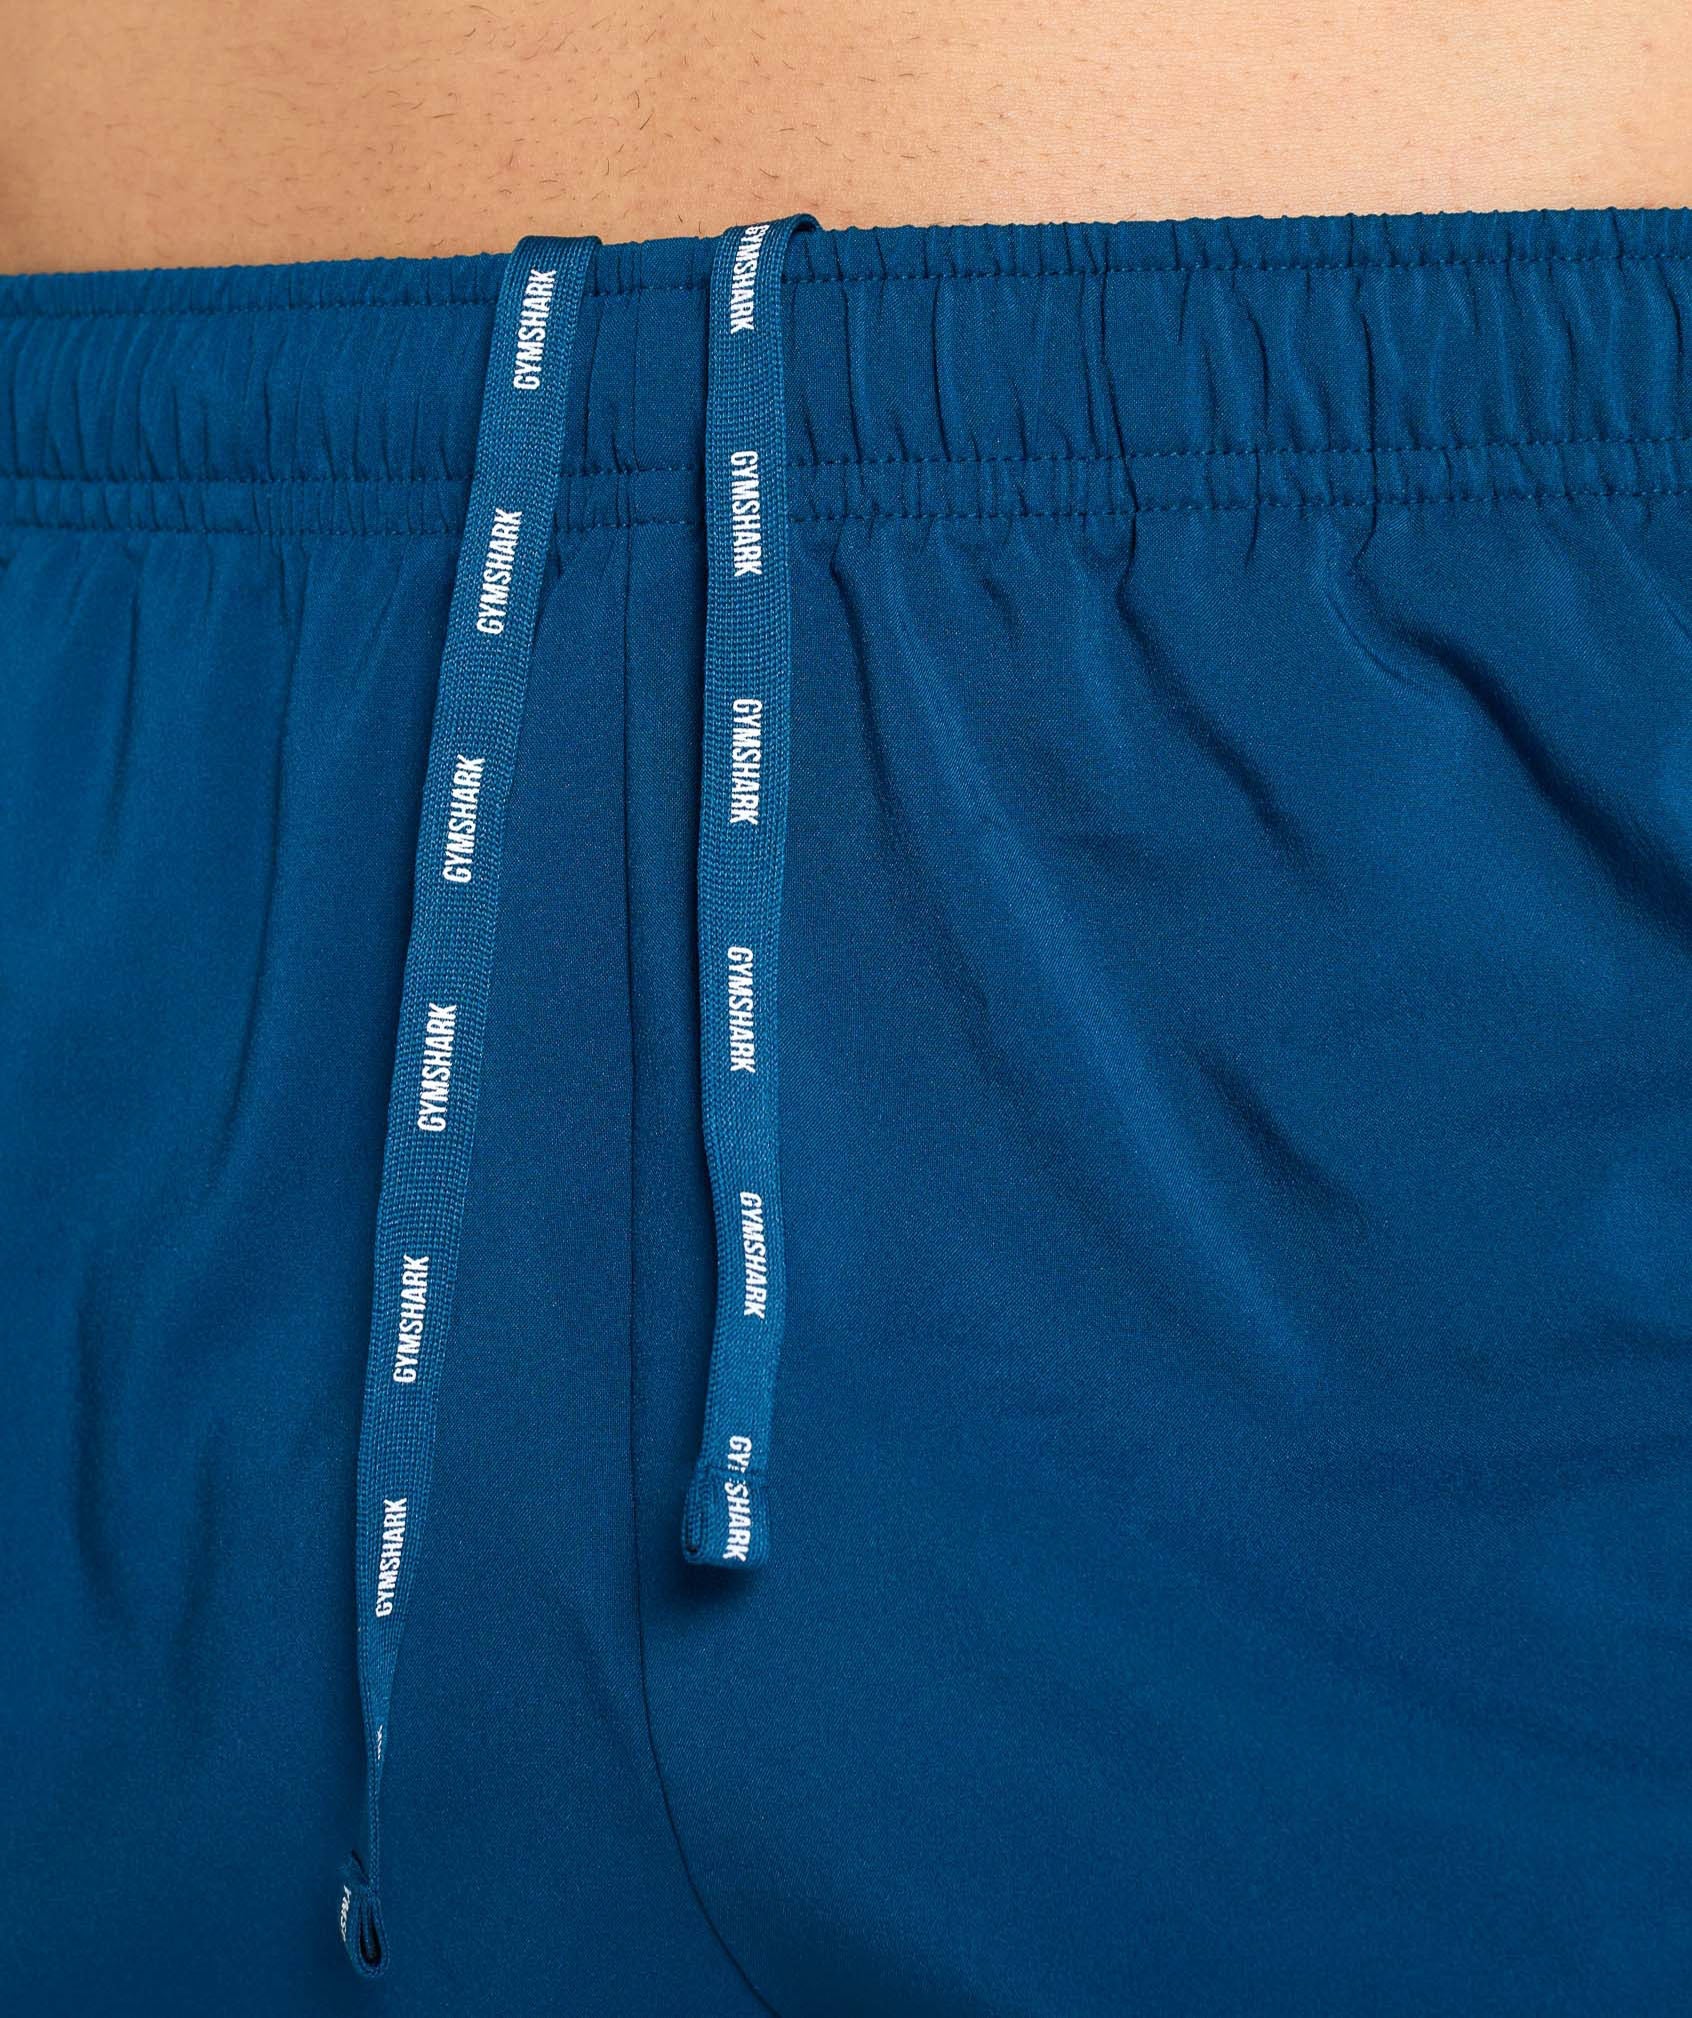 Arrival 5" Shorts in Petrol Blue - view 7